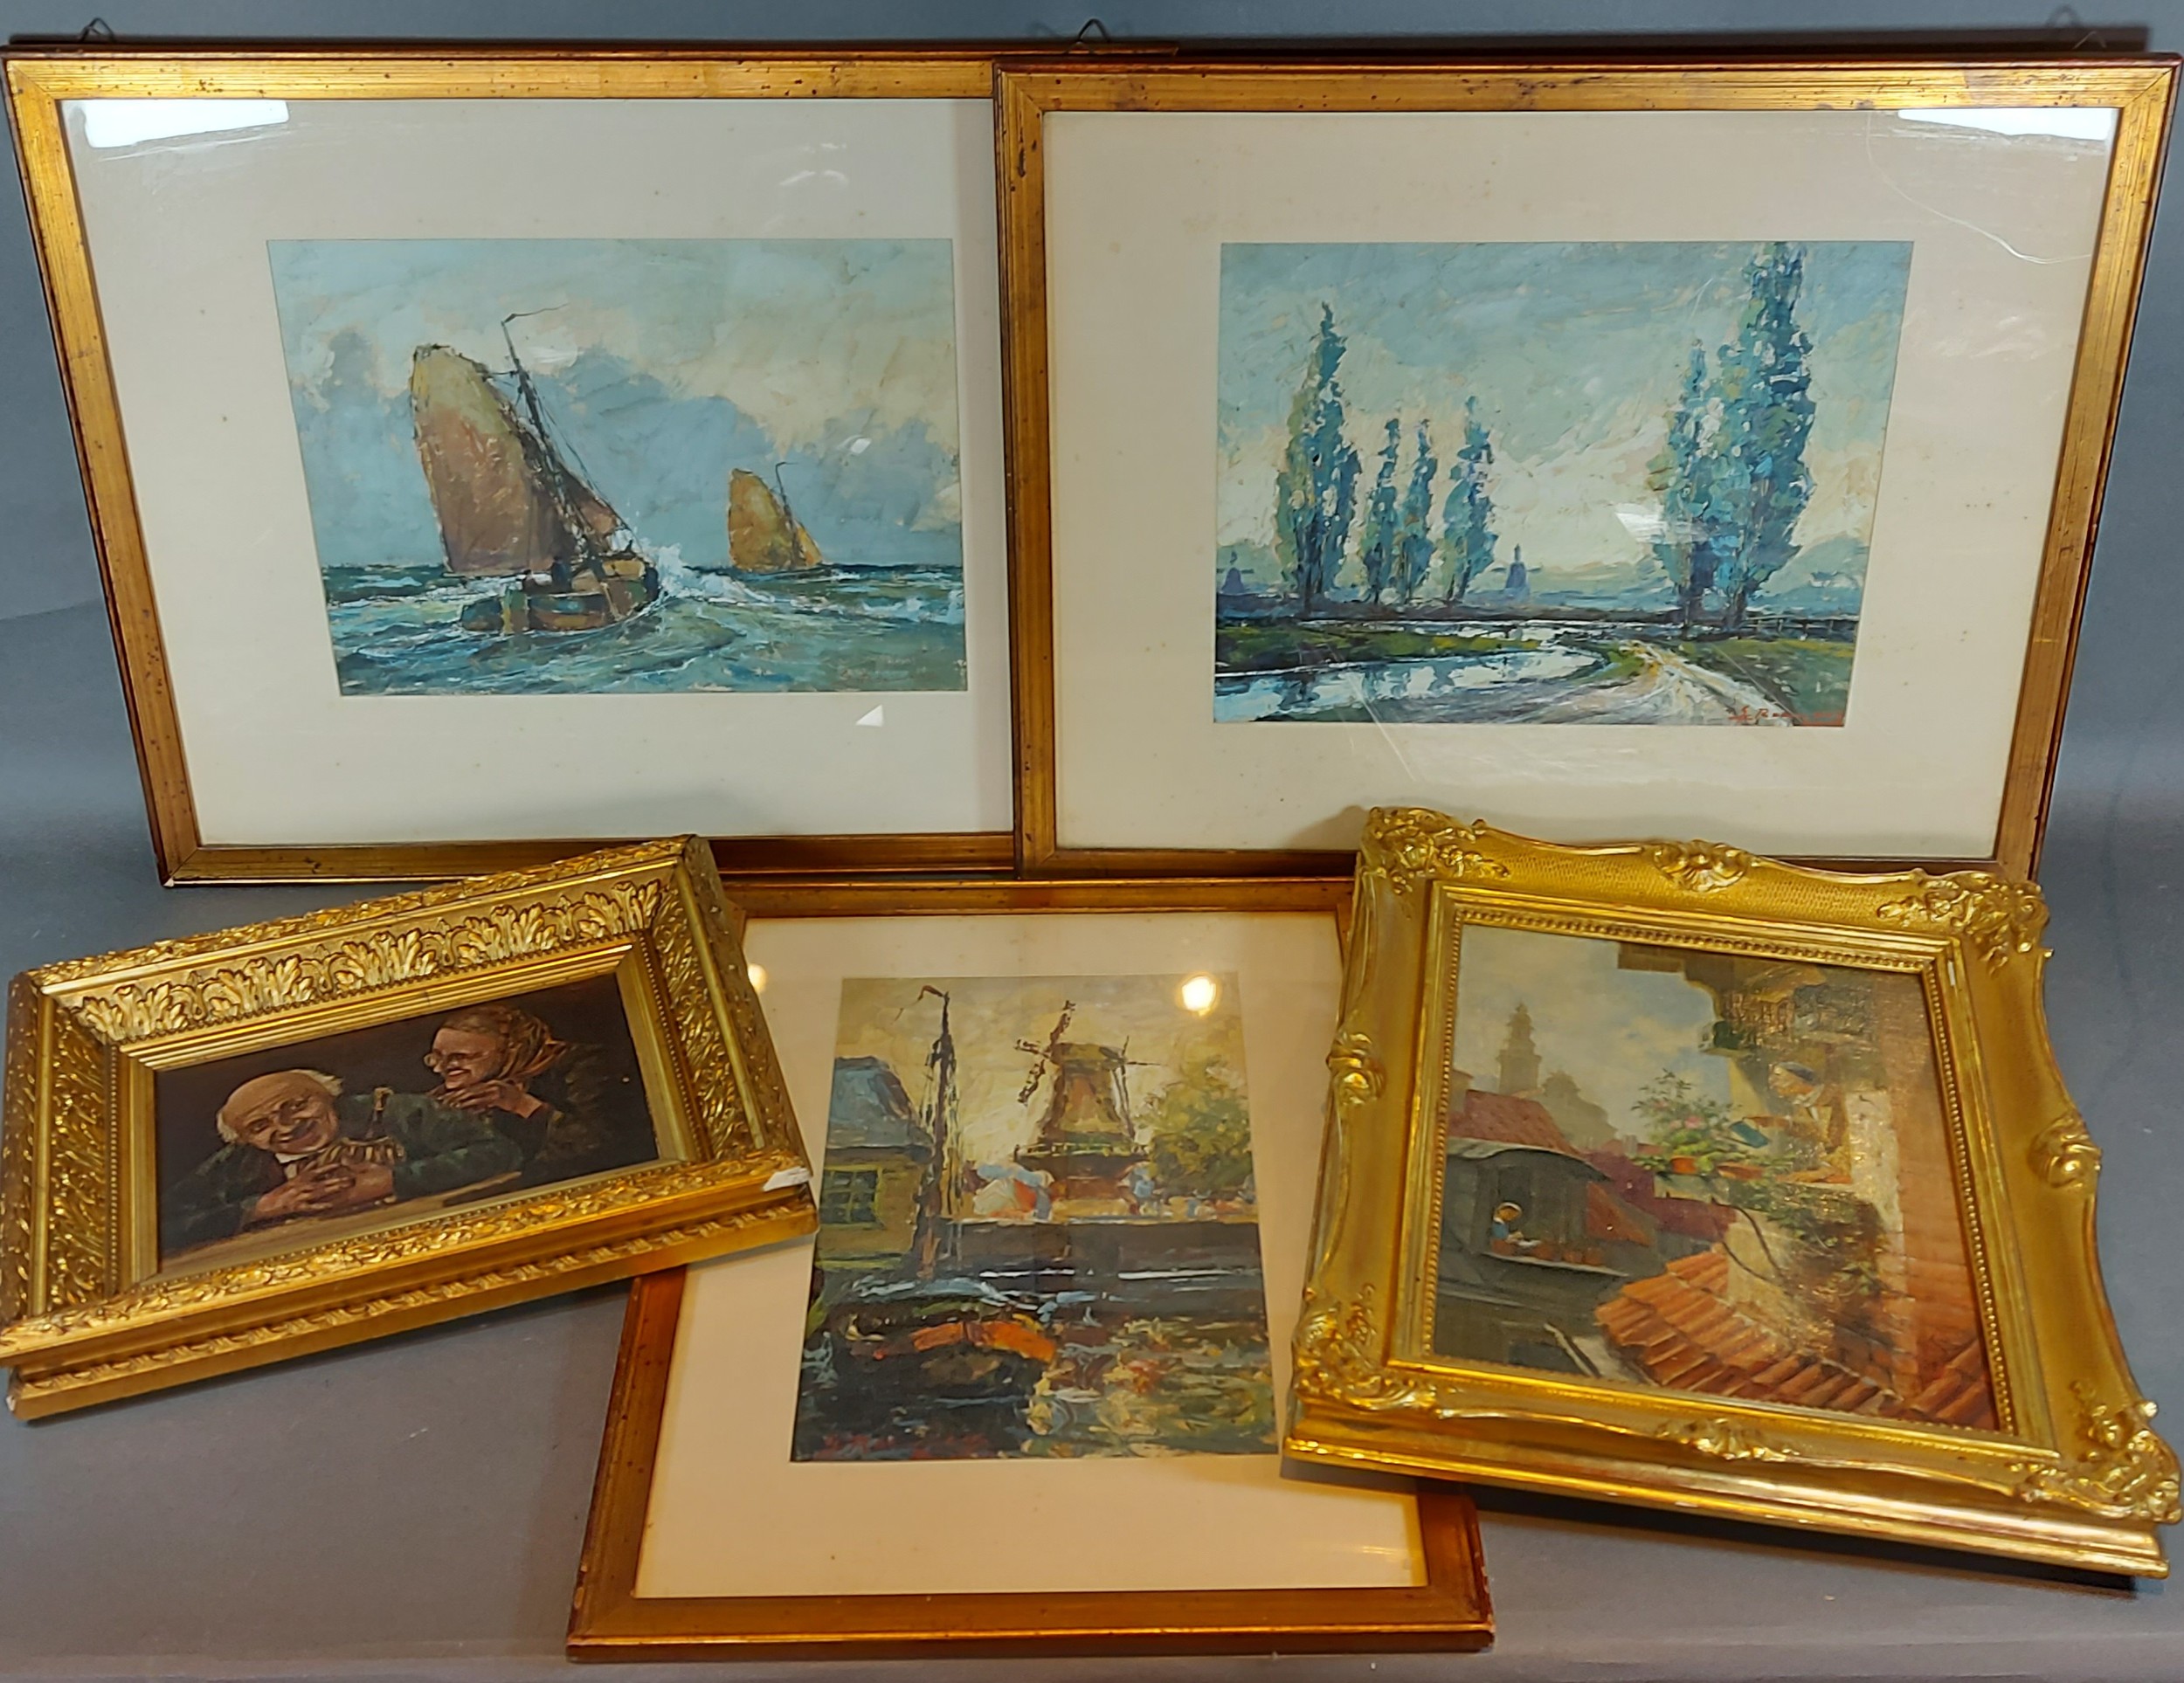 Indistinctly signed, a group of three Dutch oil paintings together with two other similar pictures